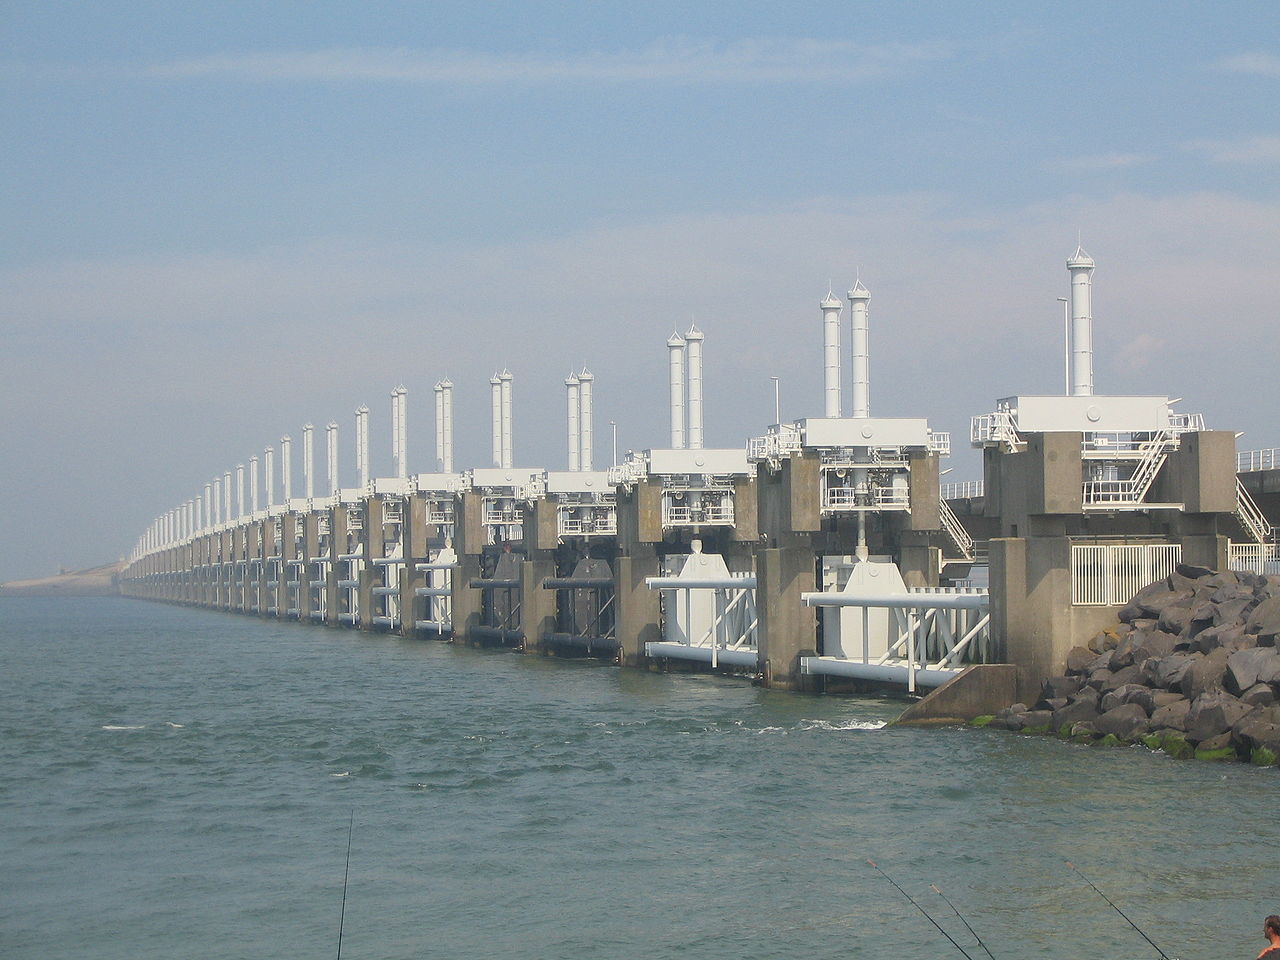 One of the three movable barrier sections of the Oosterscheldekering